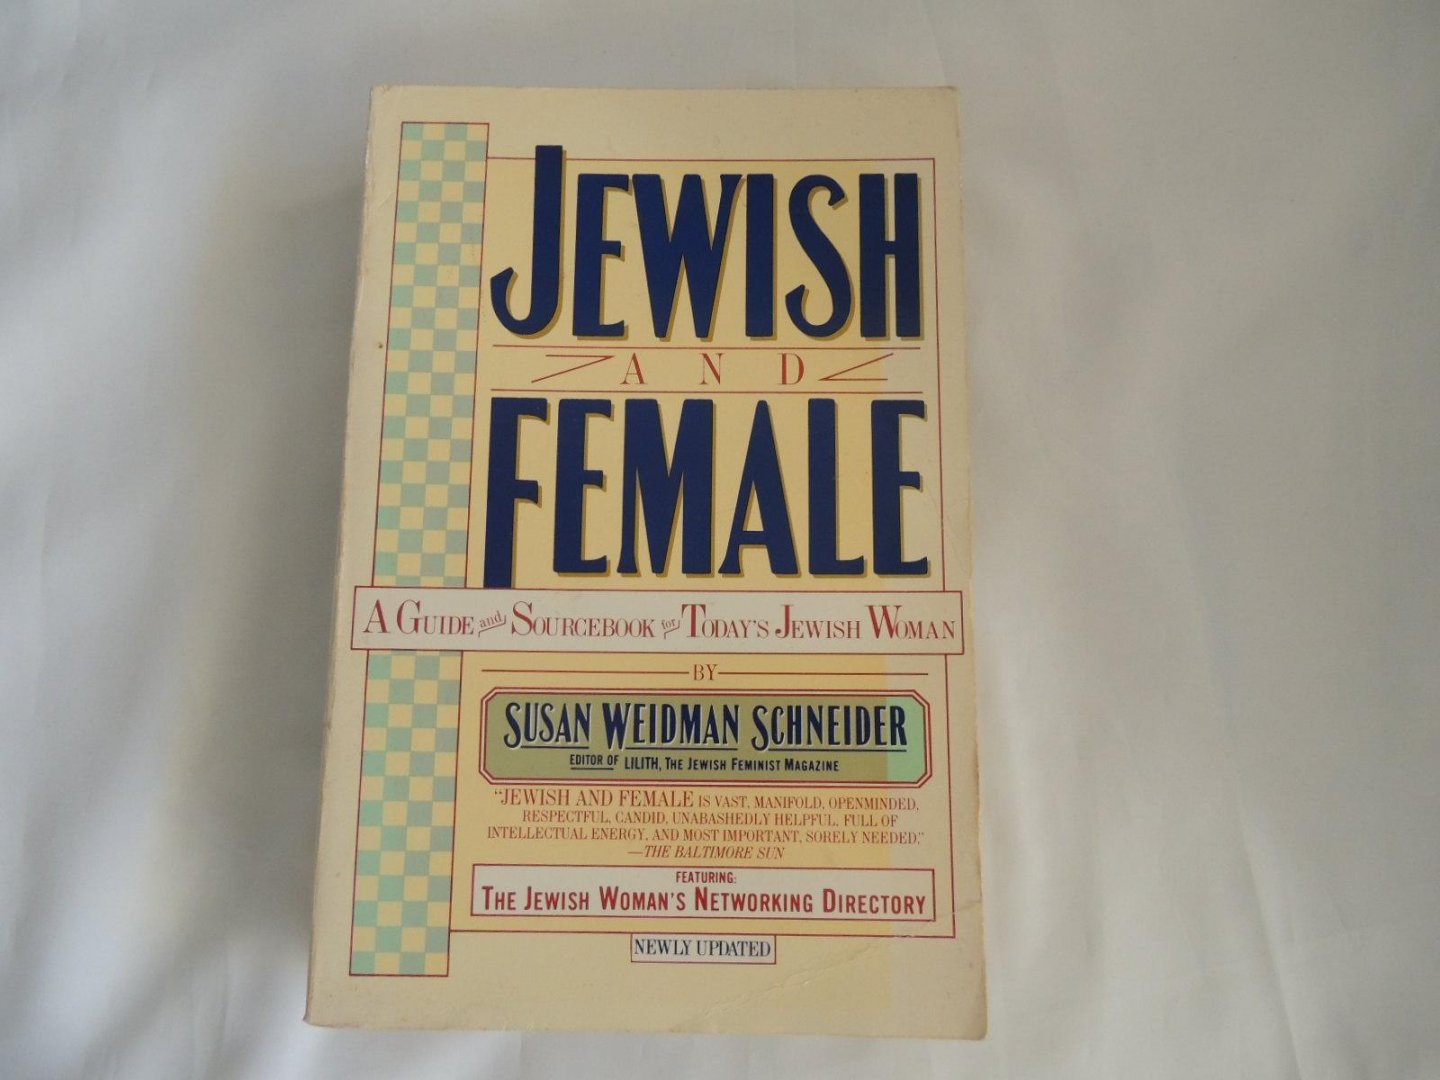 WEIDMAN SCHNEIDER, SUSAN - Jewish and female. Choices and changes in our lives today. - a guide and sourcebook for today's jewish woman